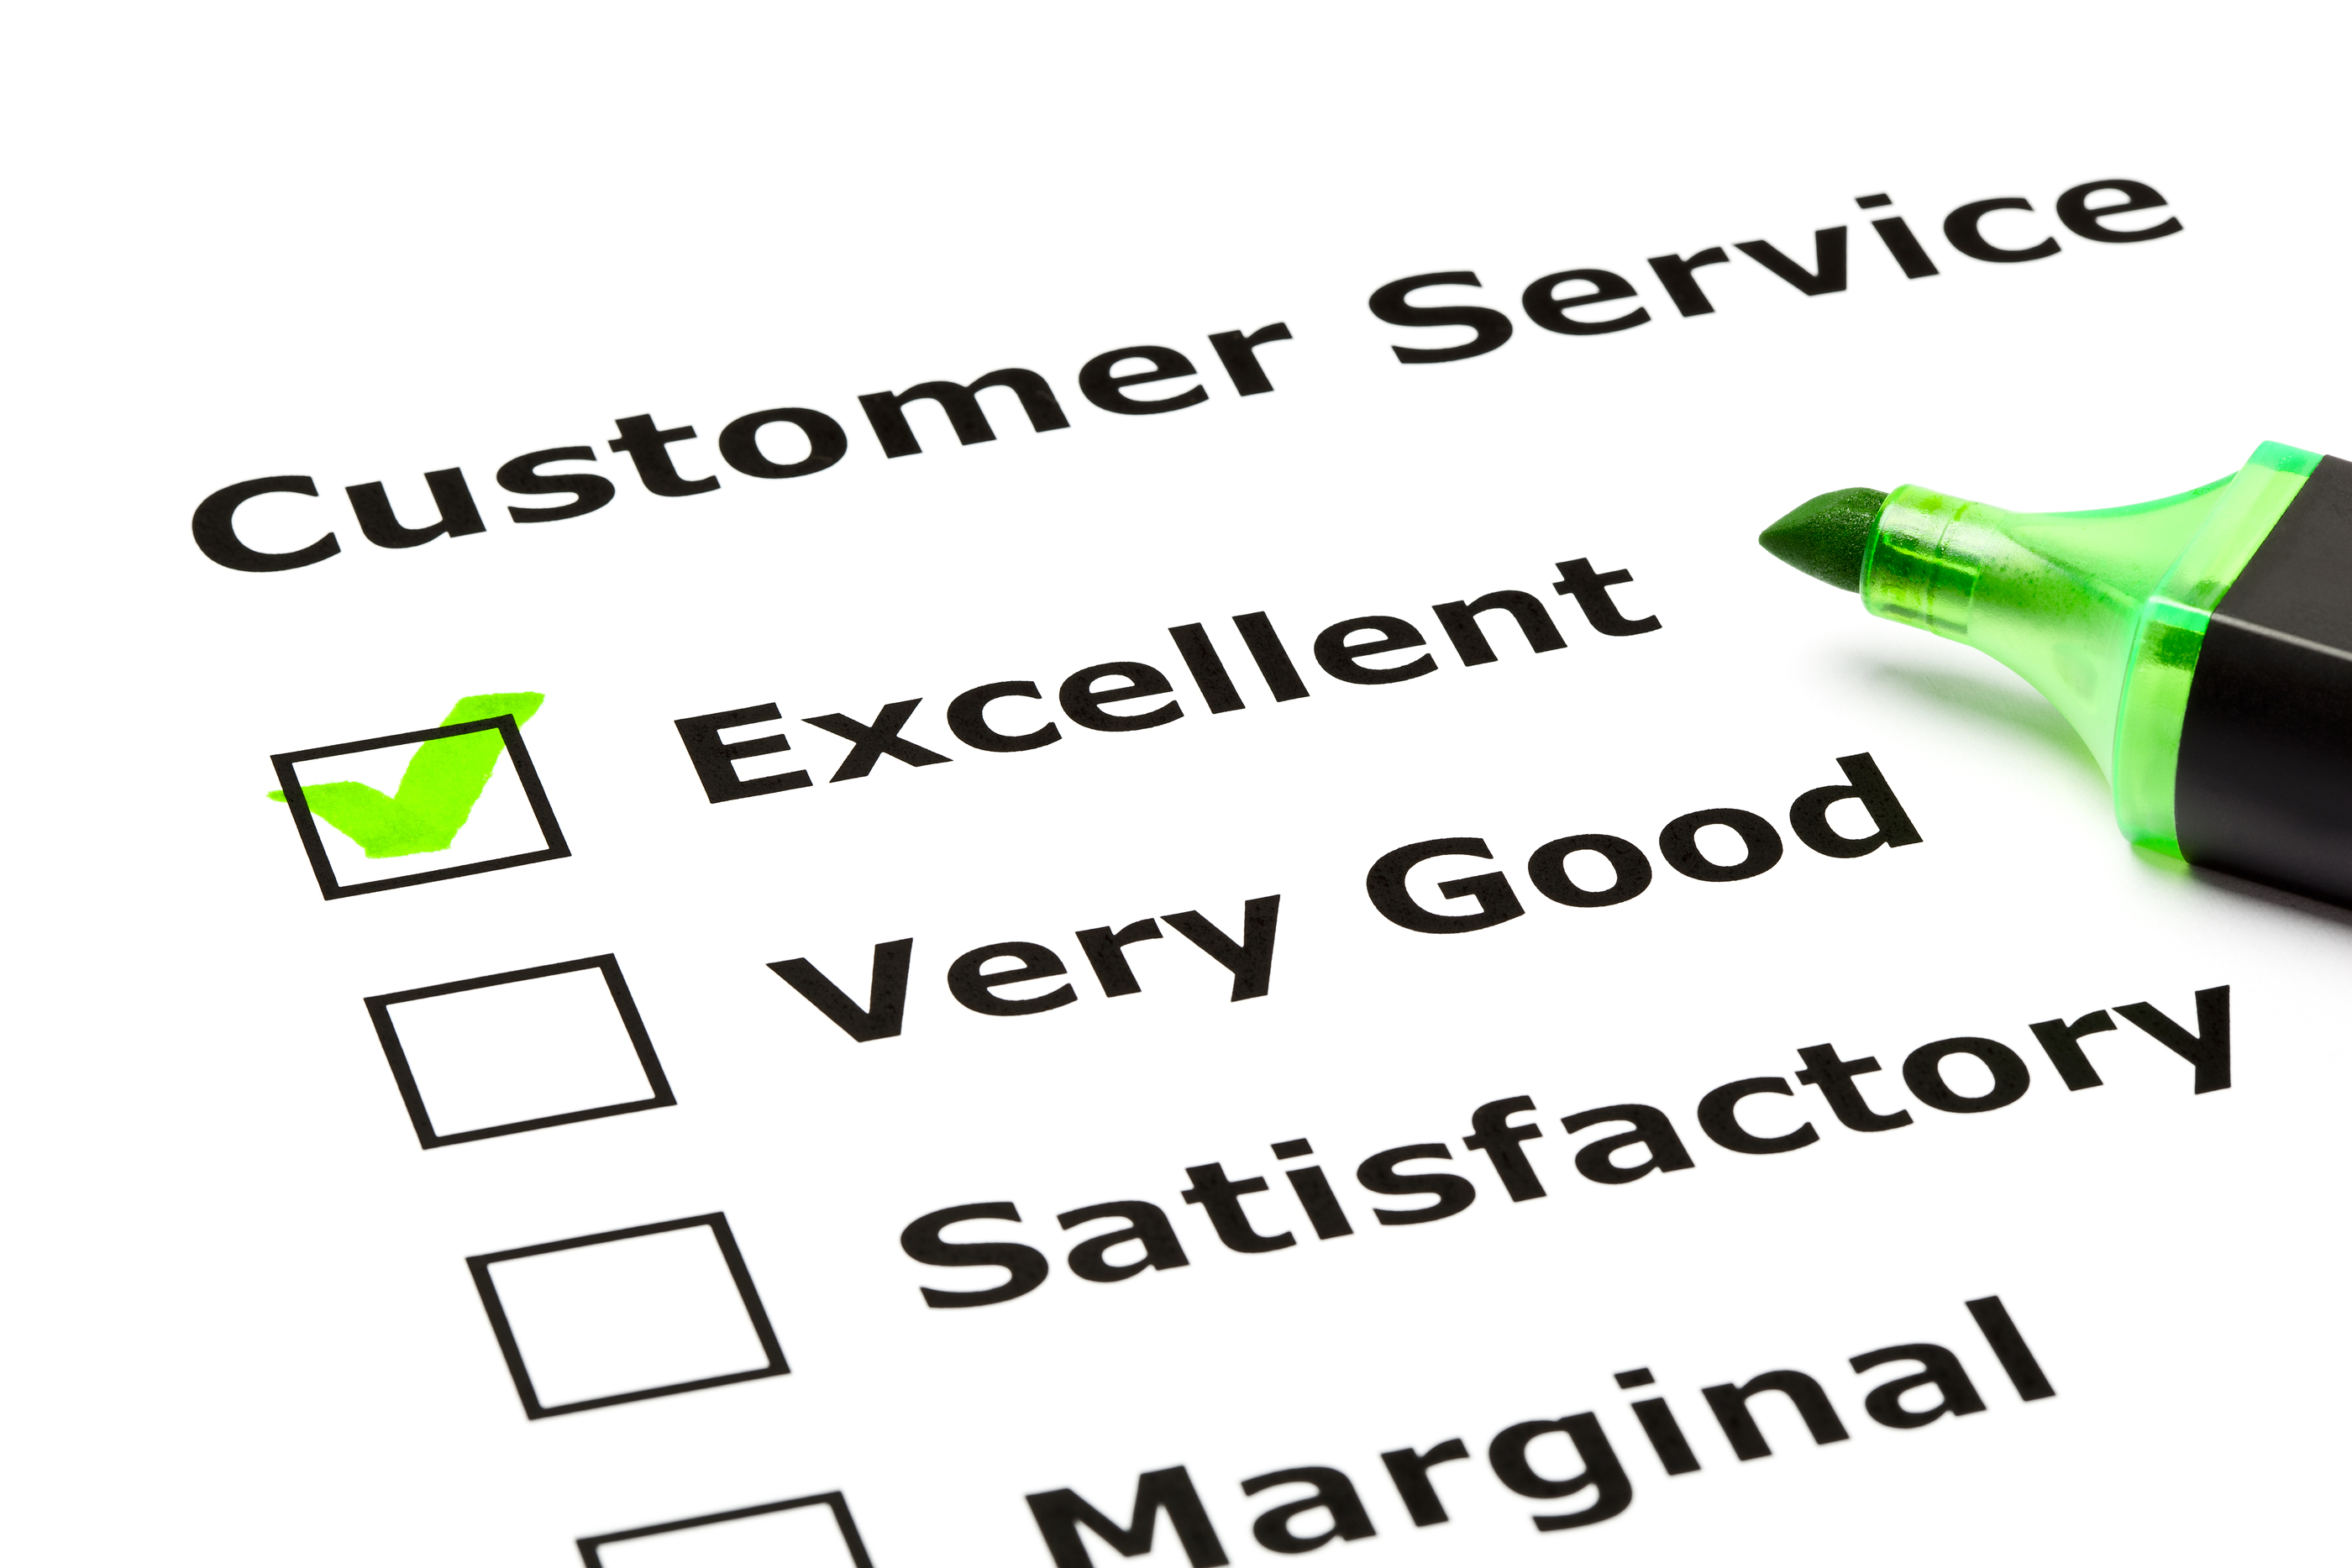 Tell a story about excellent customer service!